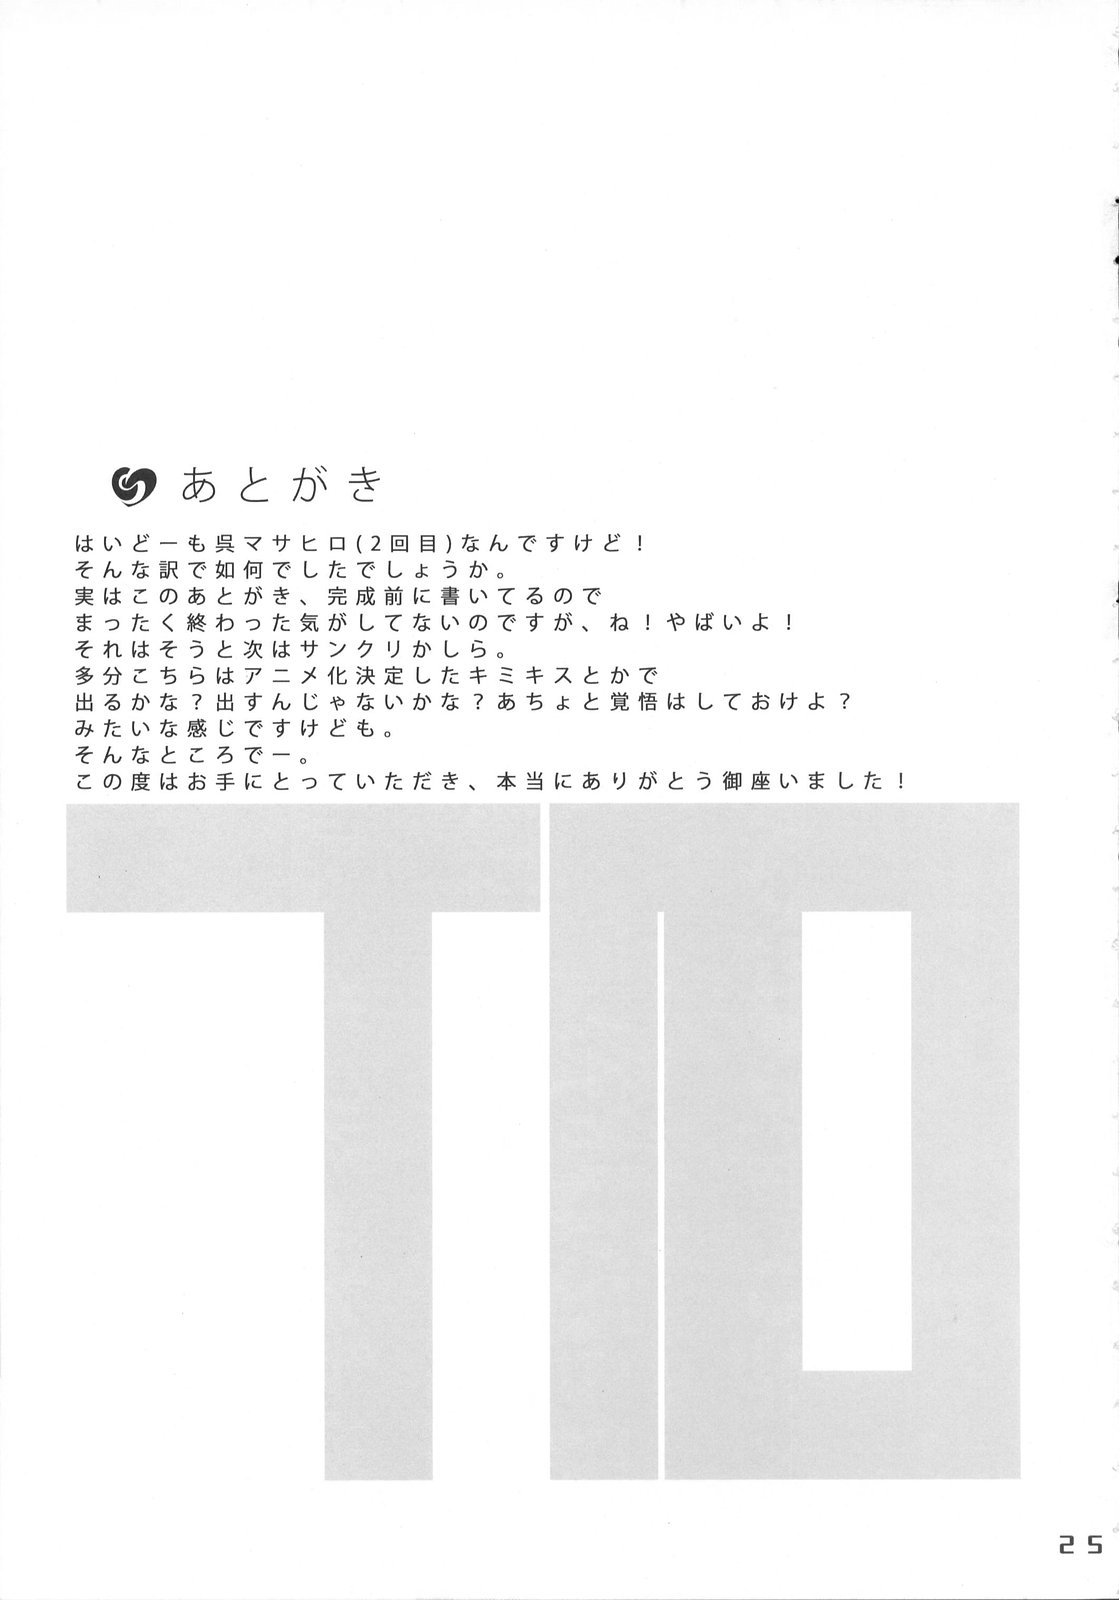 (C72)(Doujinshi)[Etcycle] CL-ic#1 (Kimiaru)(chinese) (C72)(同人誌)[etcycle] CL-ic#1(君ある)(微笑&amp;miku萌汉化)